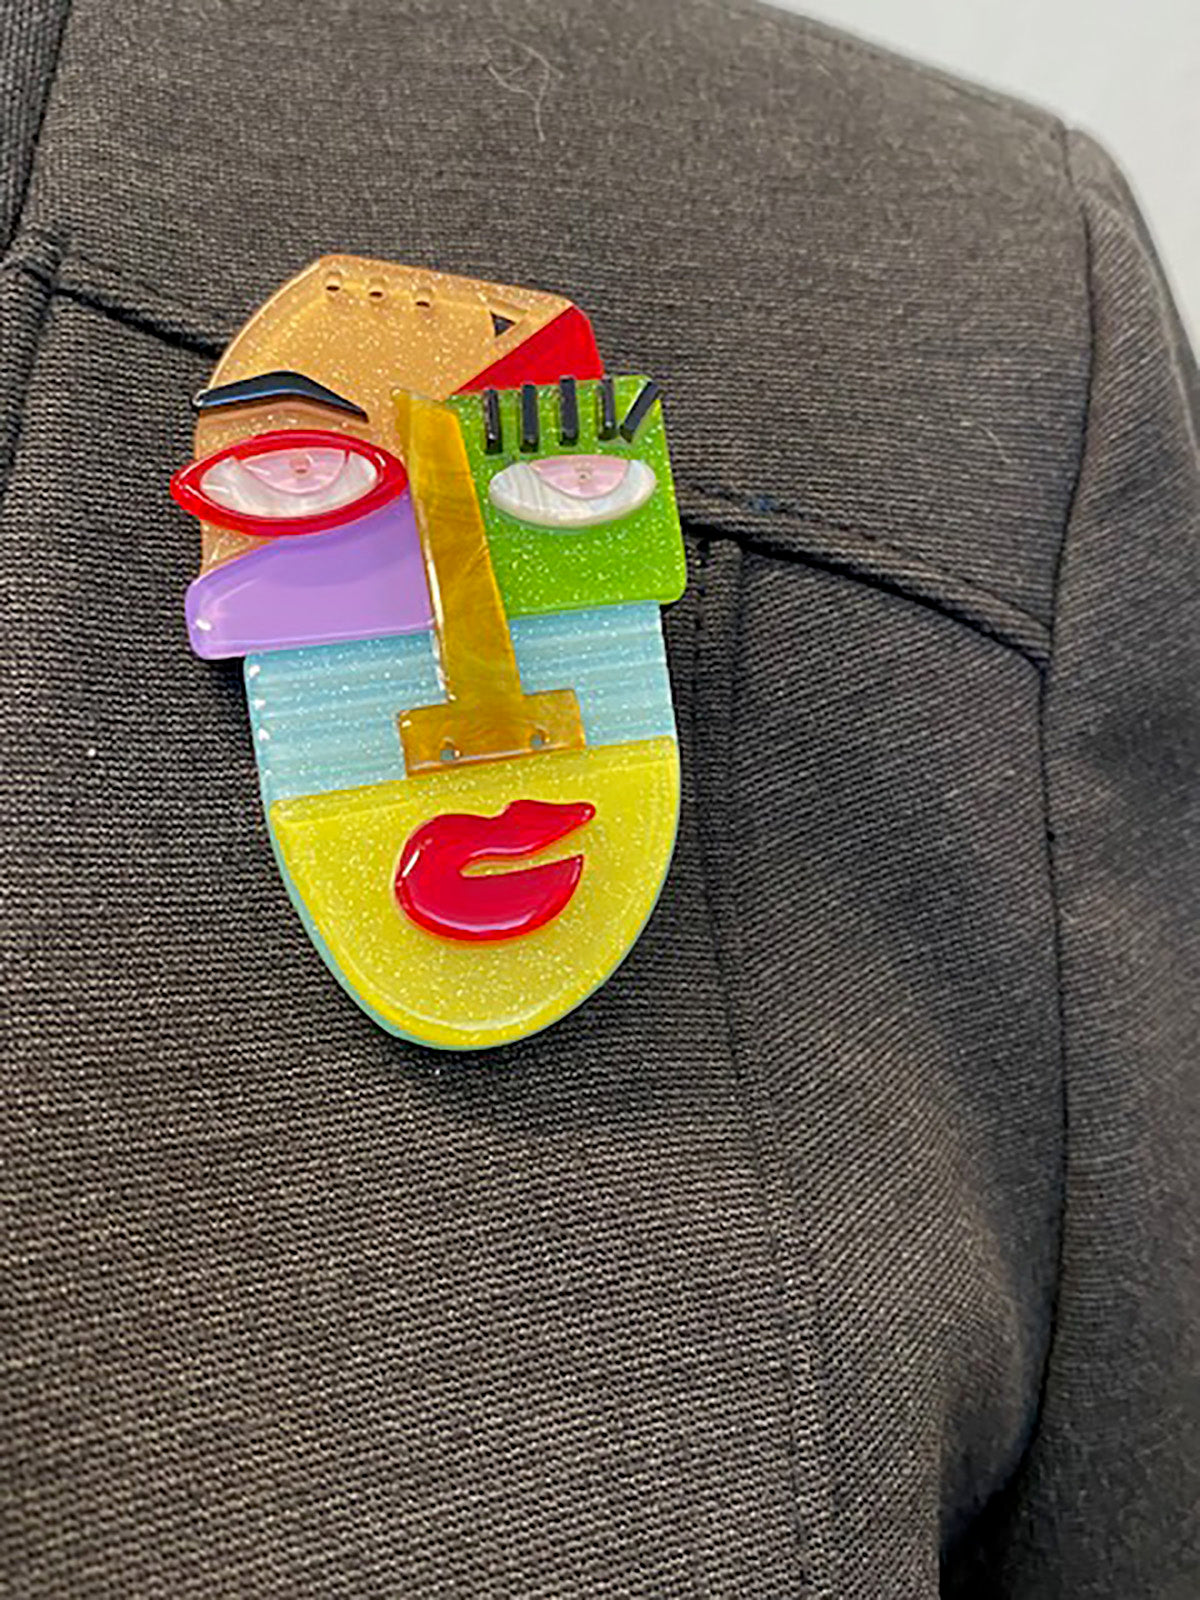 Wrapables Acrylic Fashion Brooch Pin for Sweaters, Coats, Scarves, and Bags, Abstract Face